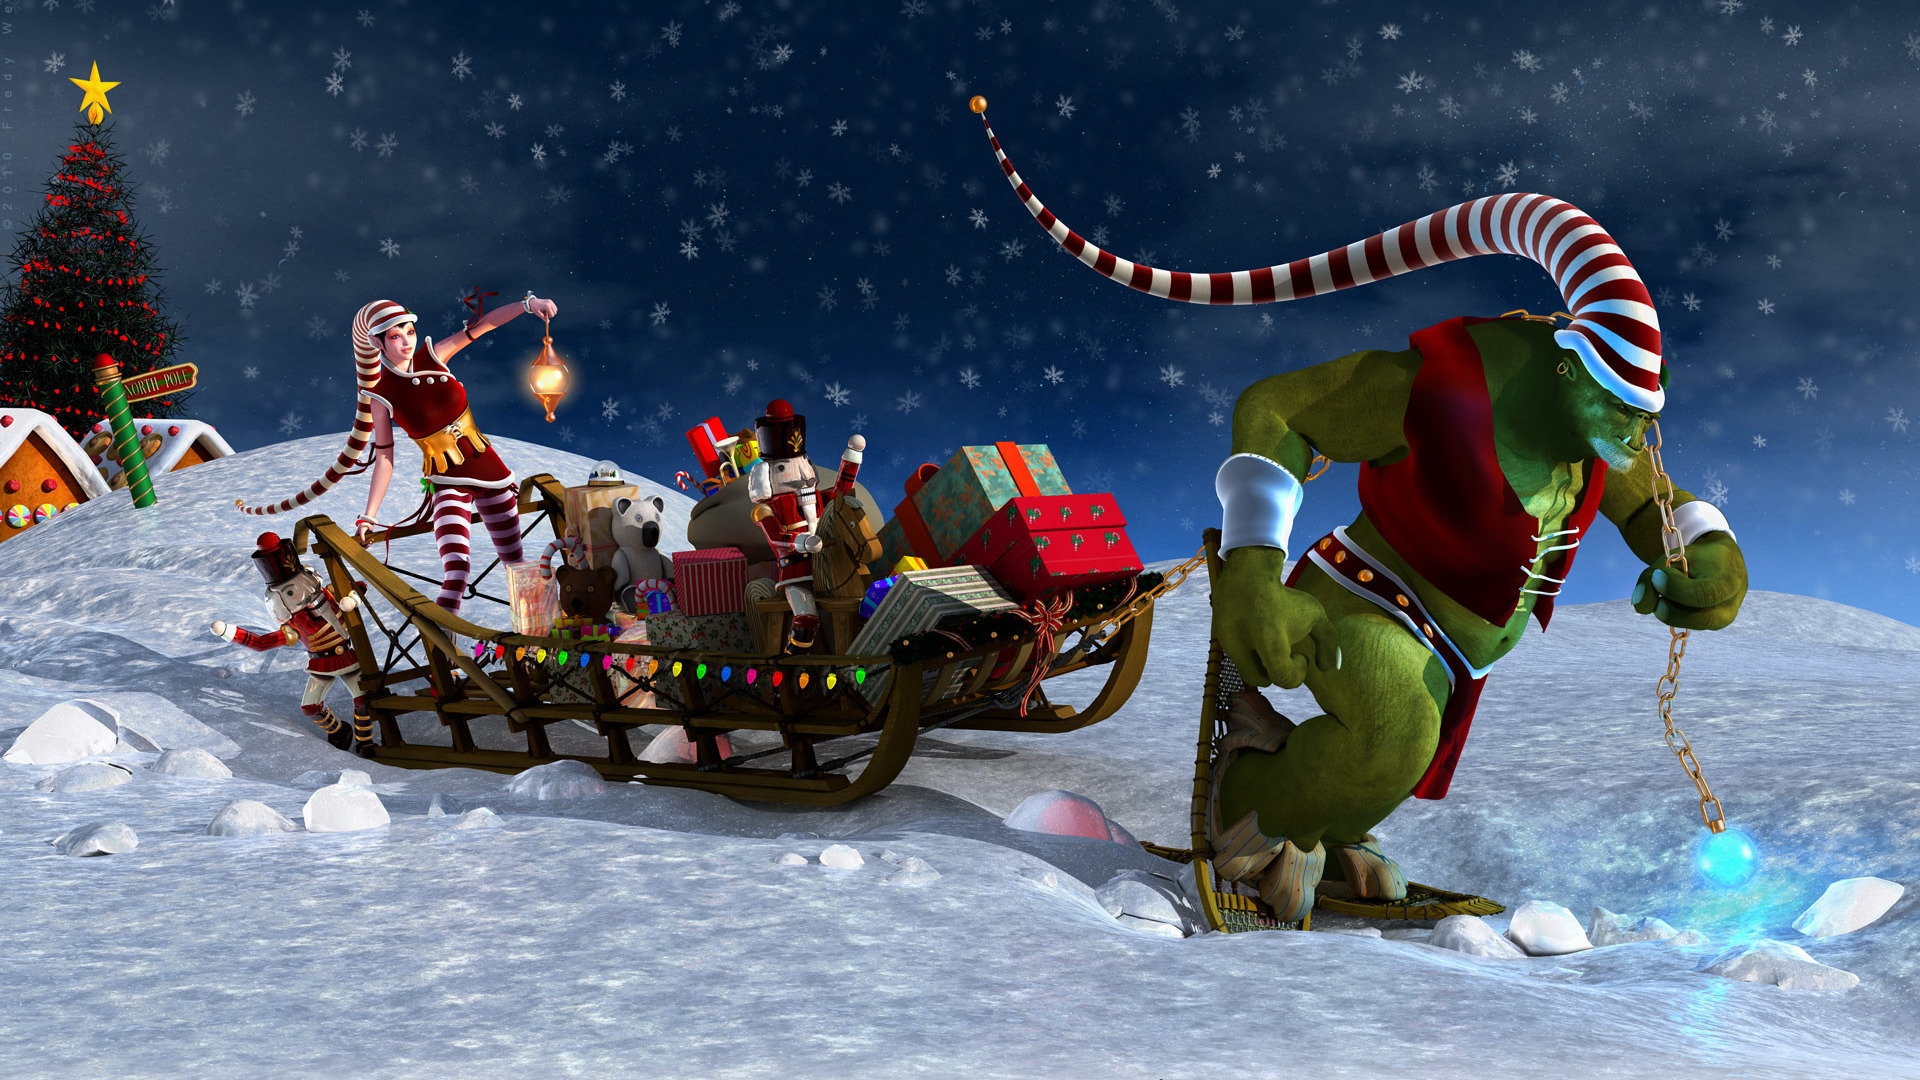 Santa Last Minute Delivery for 1920 x 1080 HDTV 1080p resolution